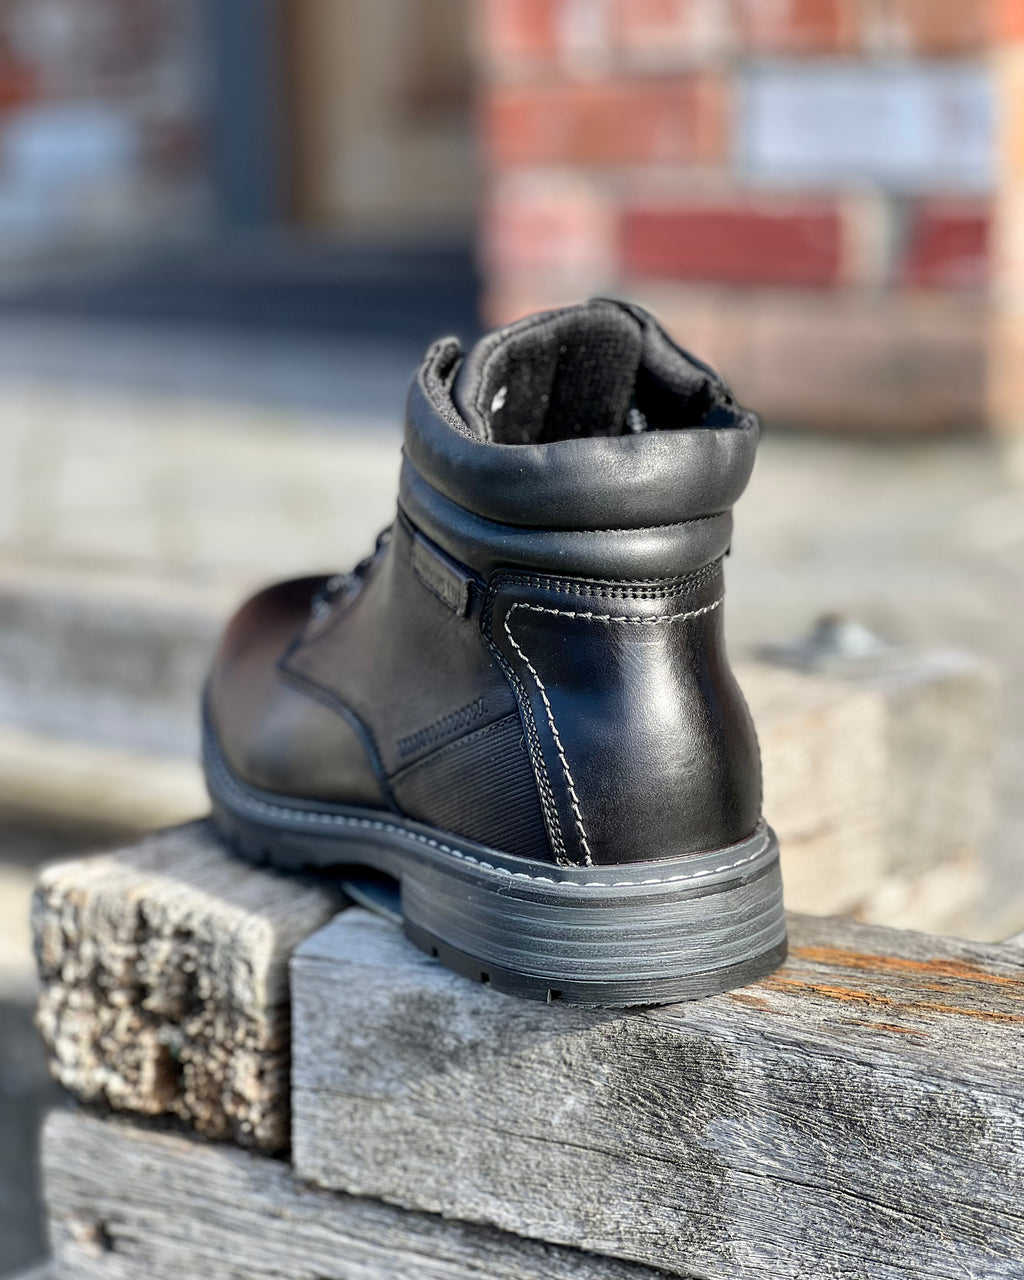 Stylish casual leather boot by Londons Life